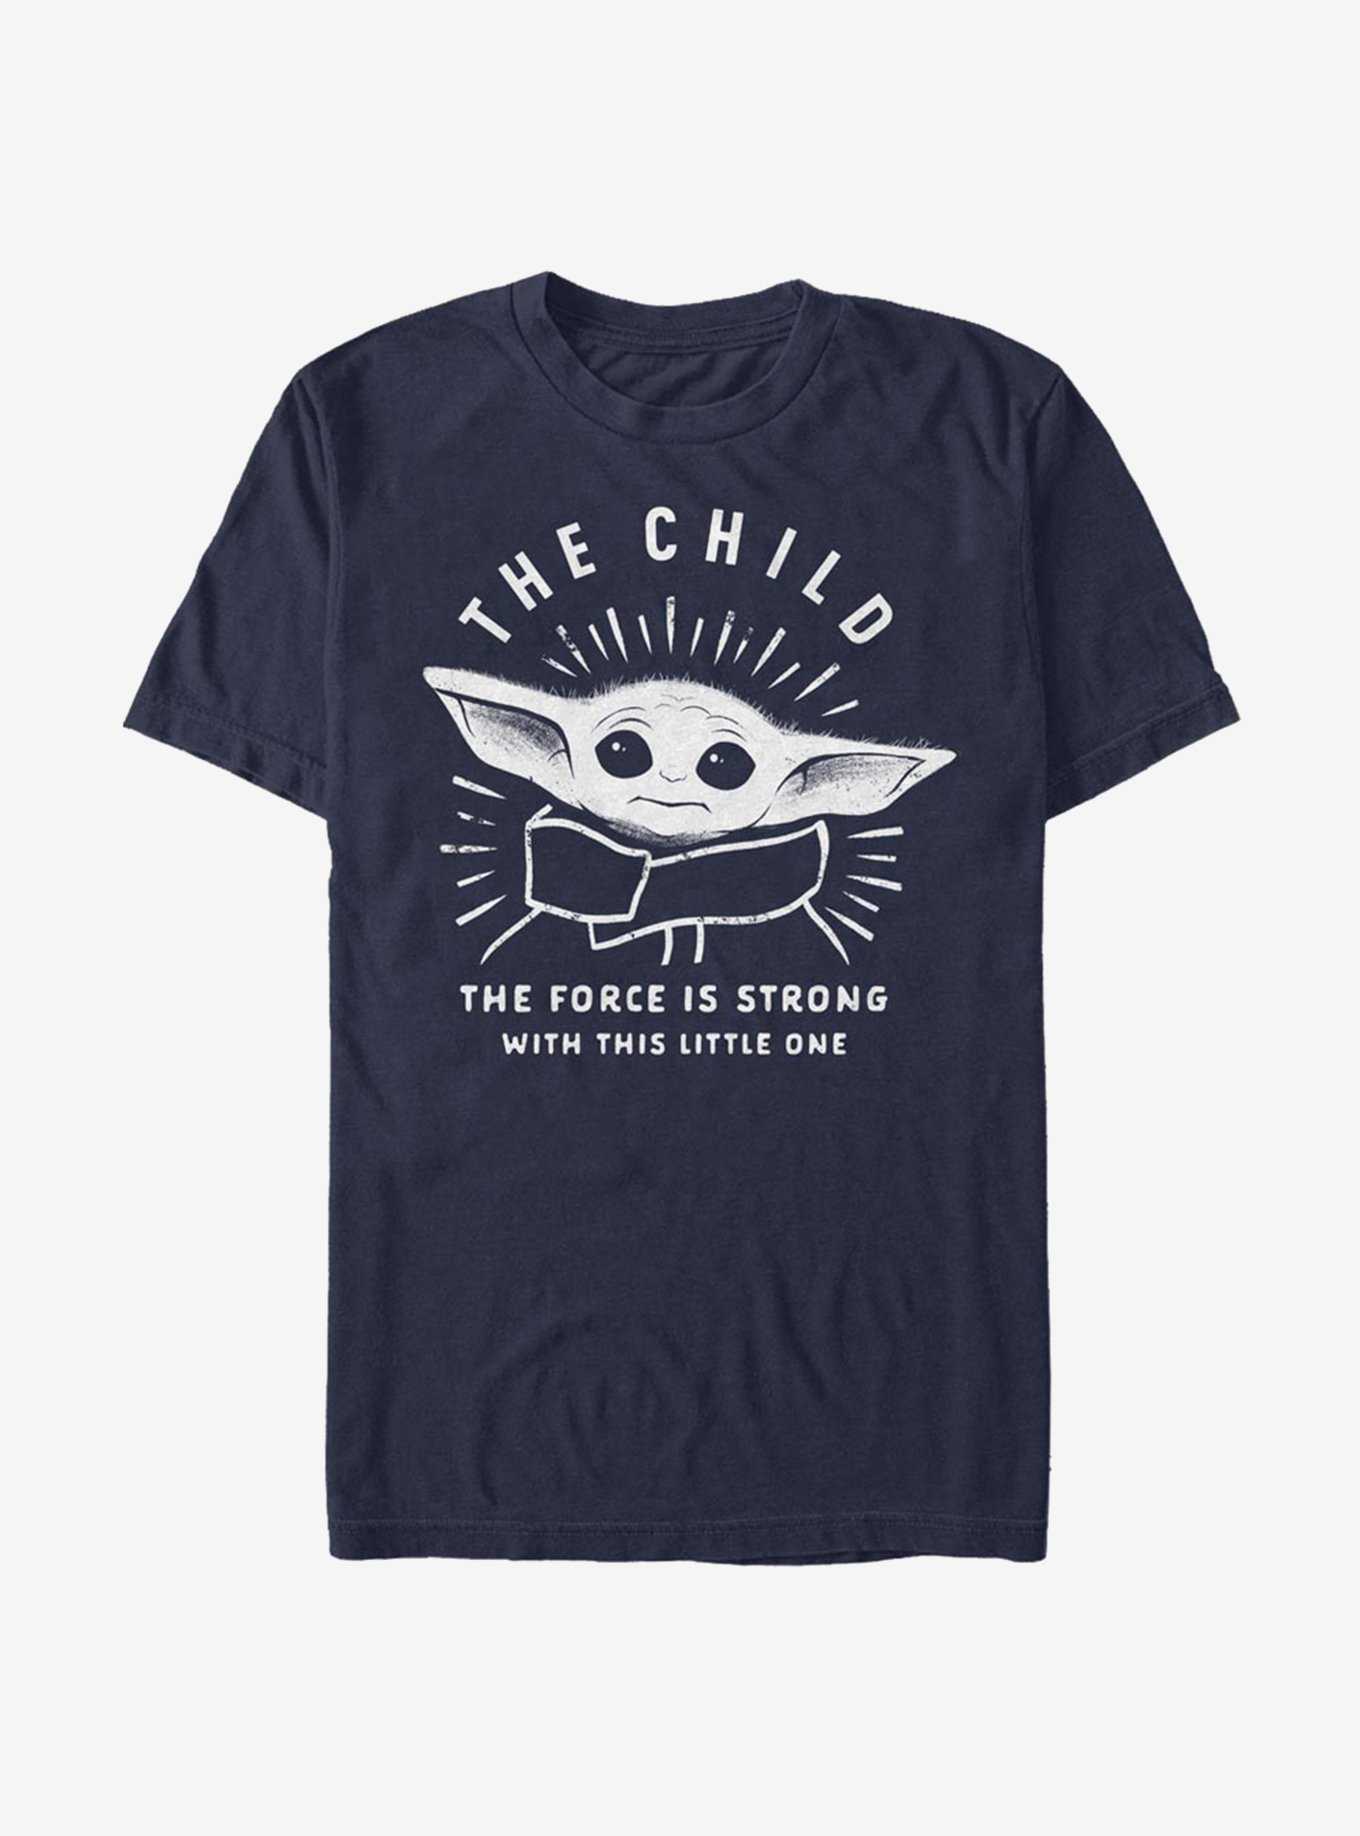 Star Wars The Mandalorian The Child The Force Is Strong T-Shirt, , hi-res